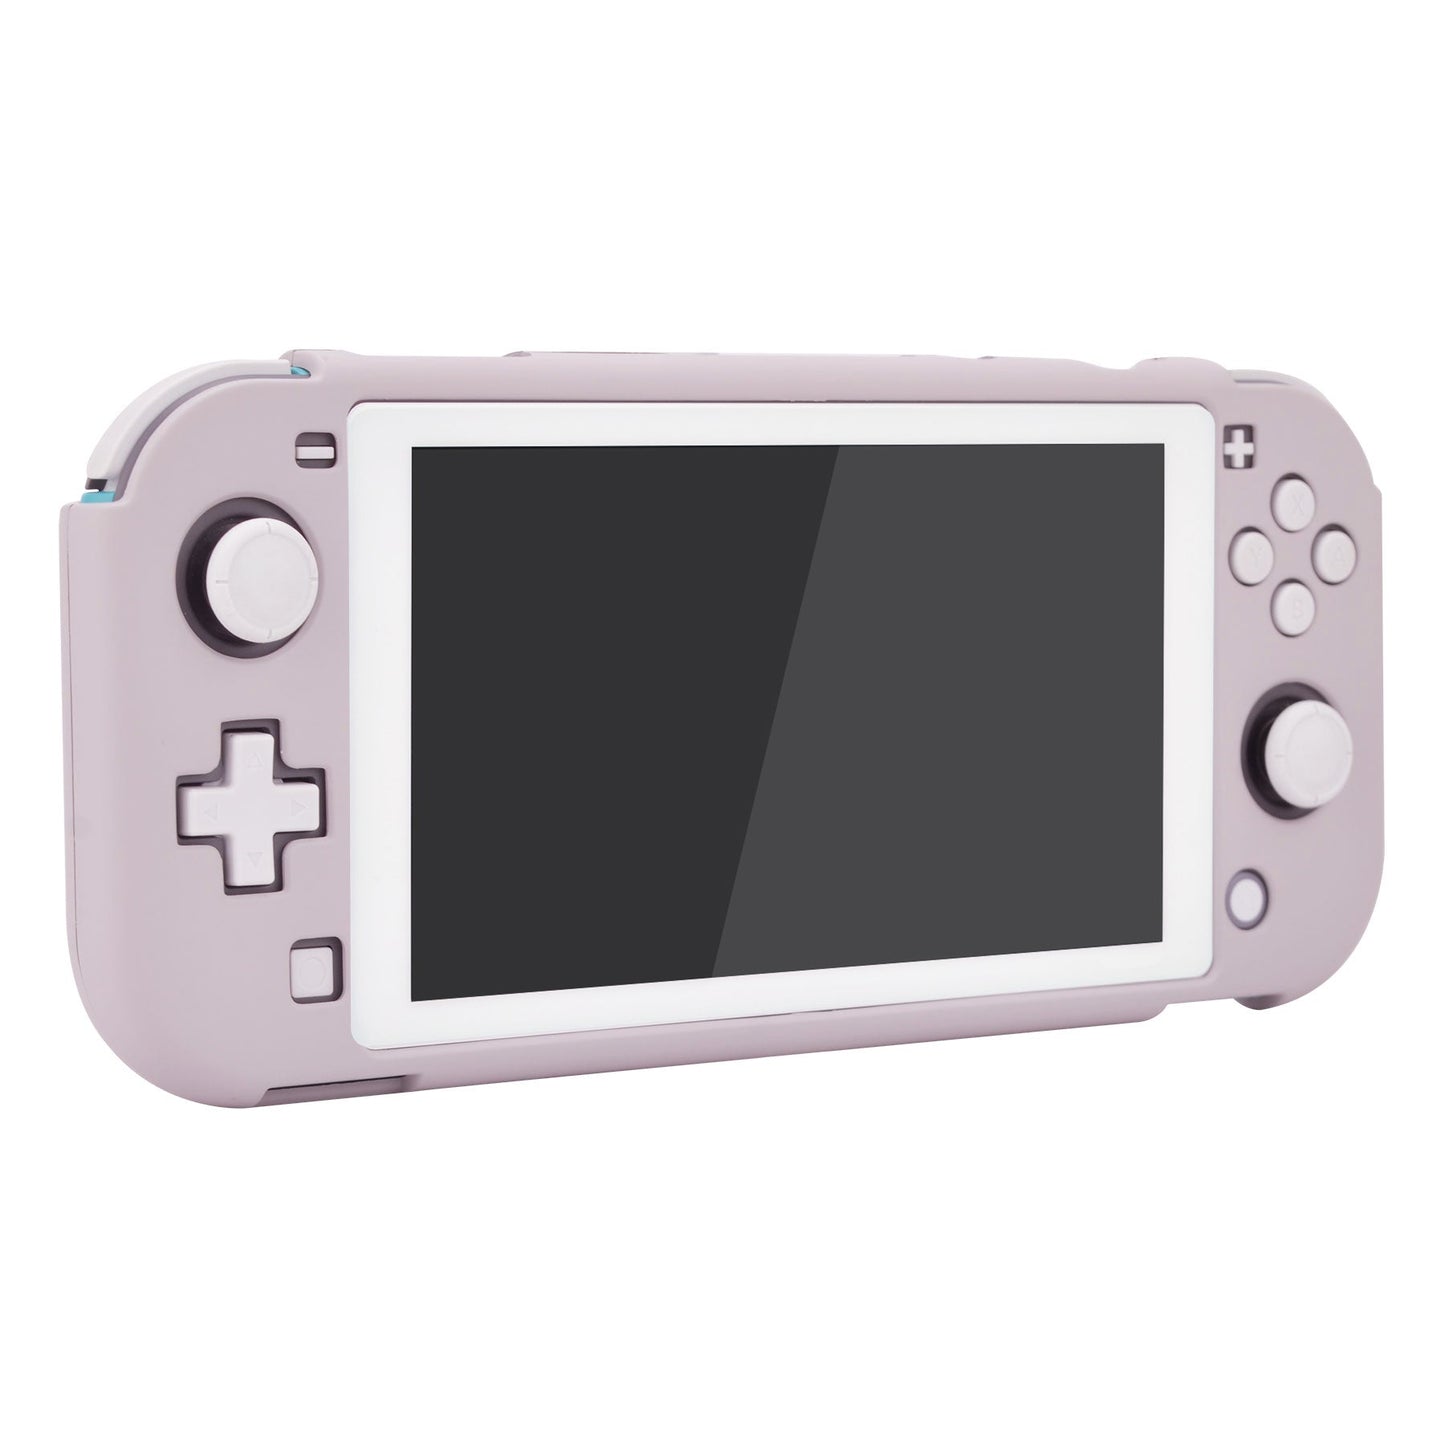 PlayVital Soft Touch Rhapsody Violet Customized Protective Grip Case for Nintendo Switch Lite, Hard Cover Protector for Nintendo Switch Lite - 1 x White Border Tempered Glass Screen Protector Included - LTP301 PlayVital